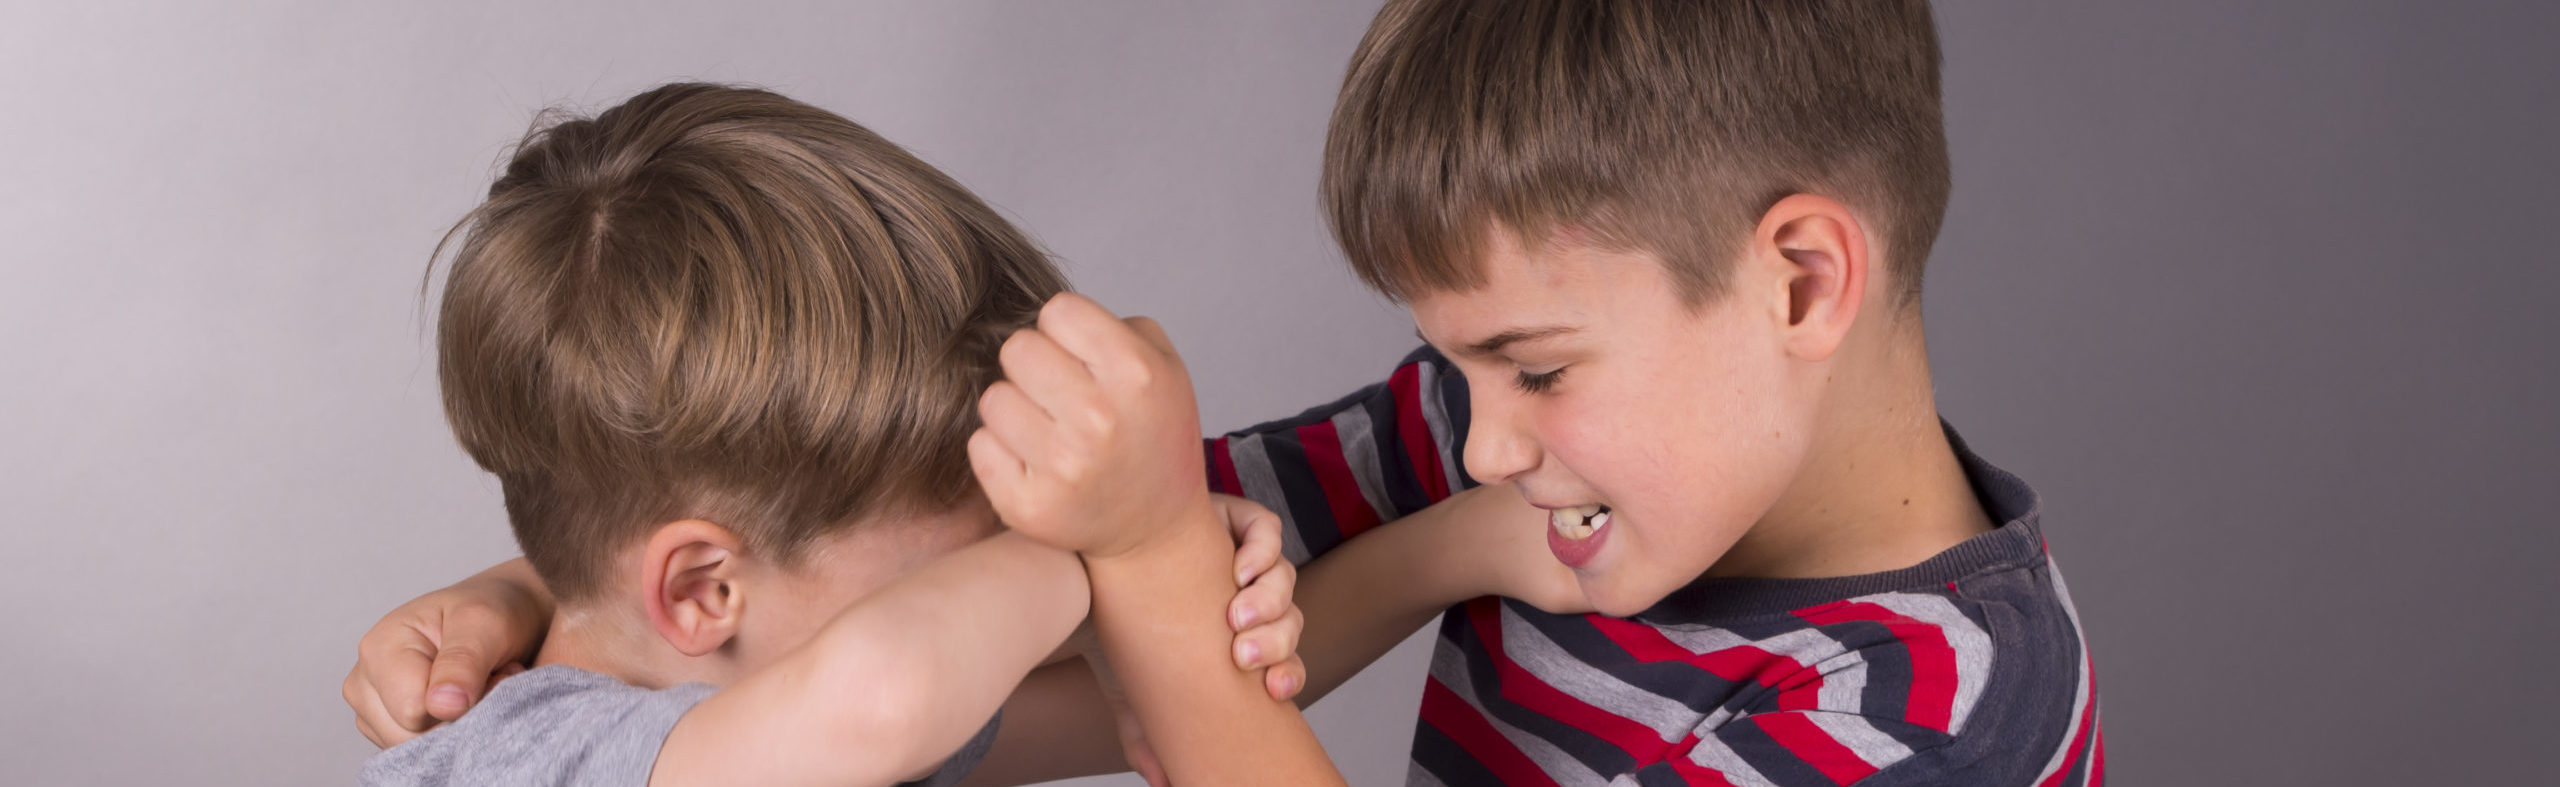 how to help child with autism stop aggression